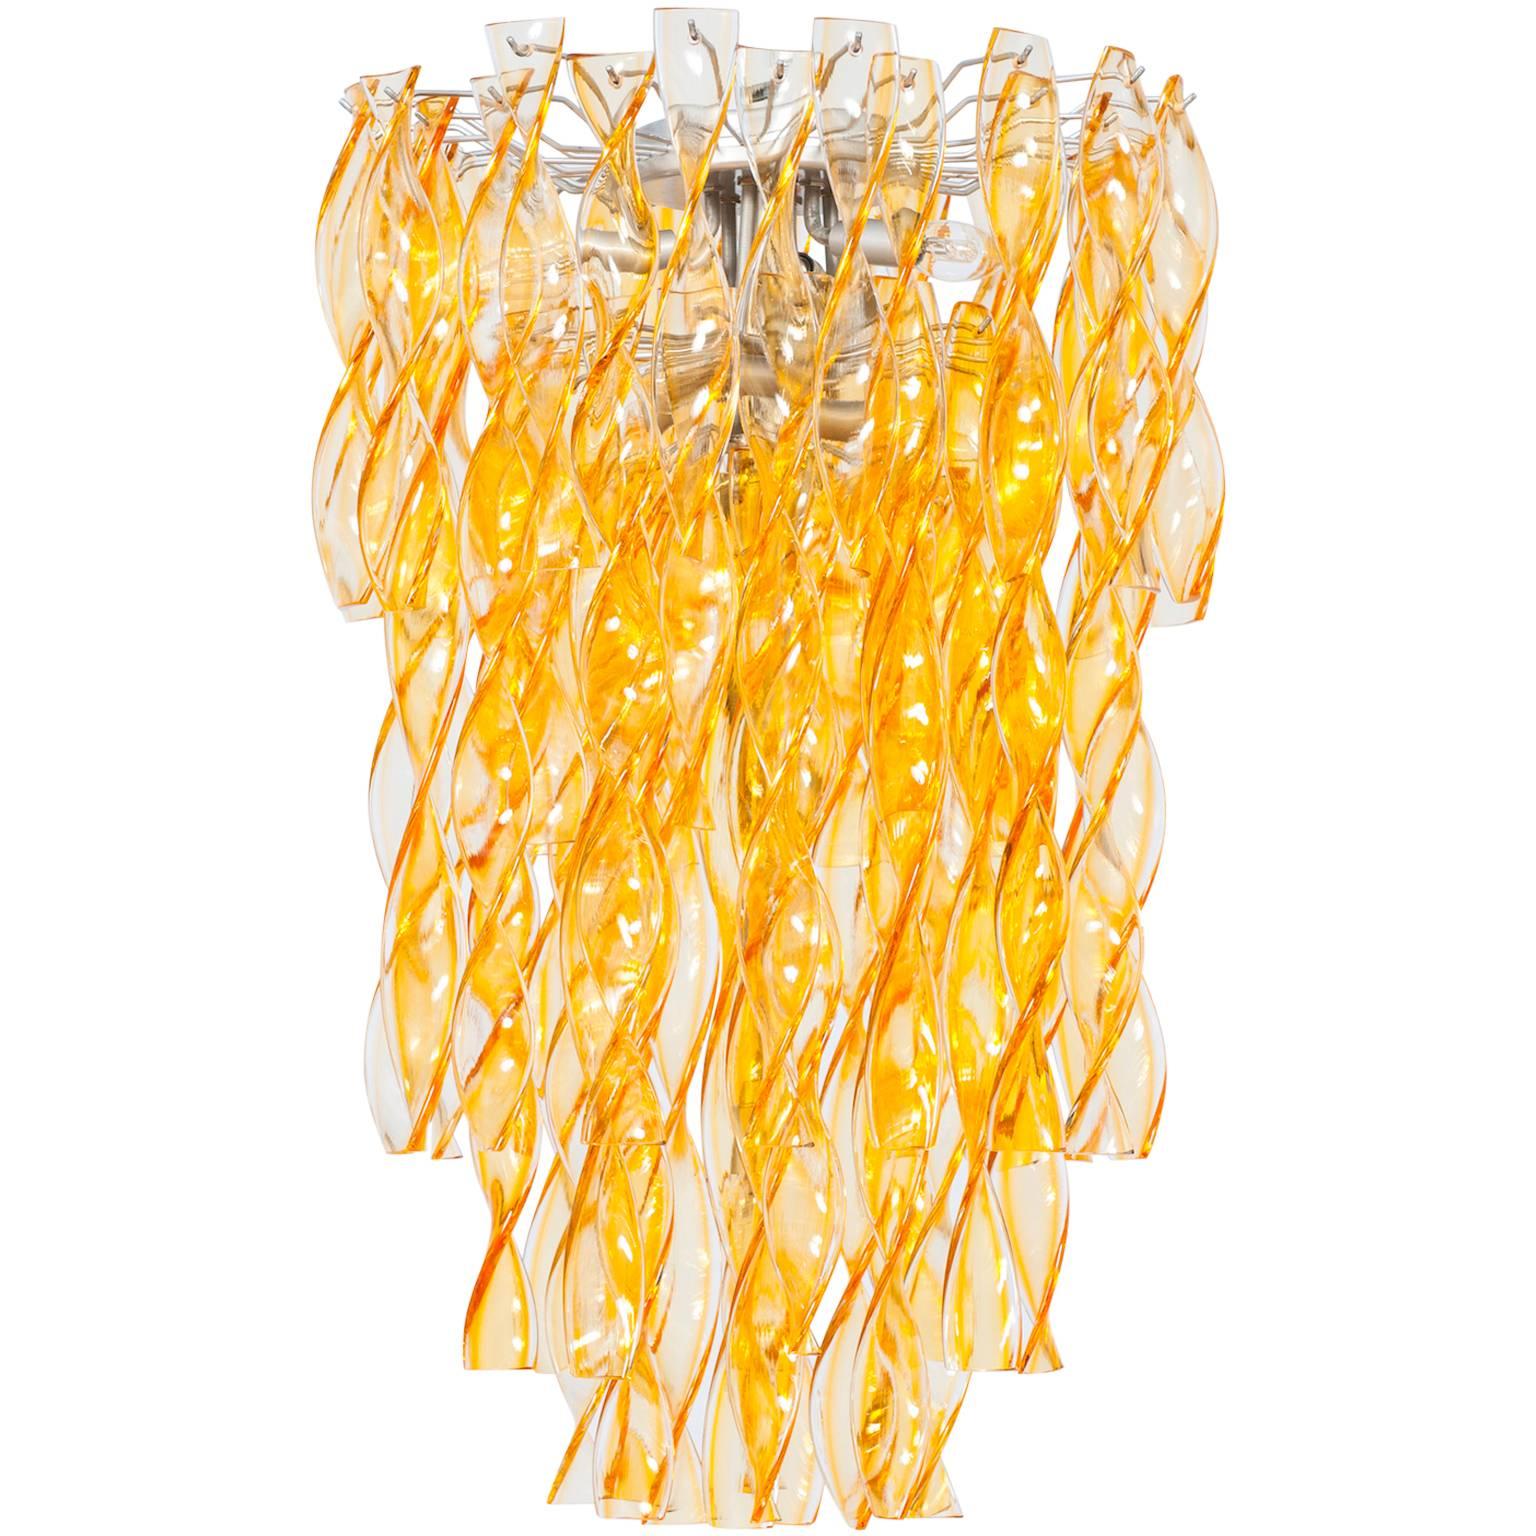 Twisted Orange Streamers Flush Mount in Murano Glass 1990s Venice Italy  For Sale